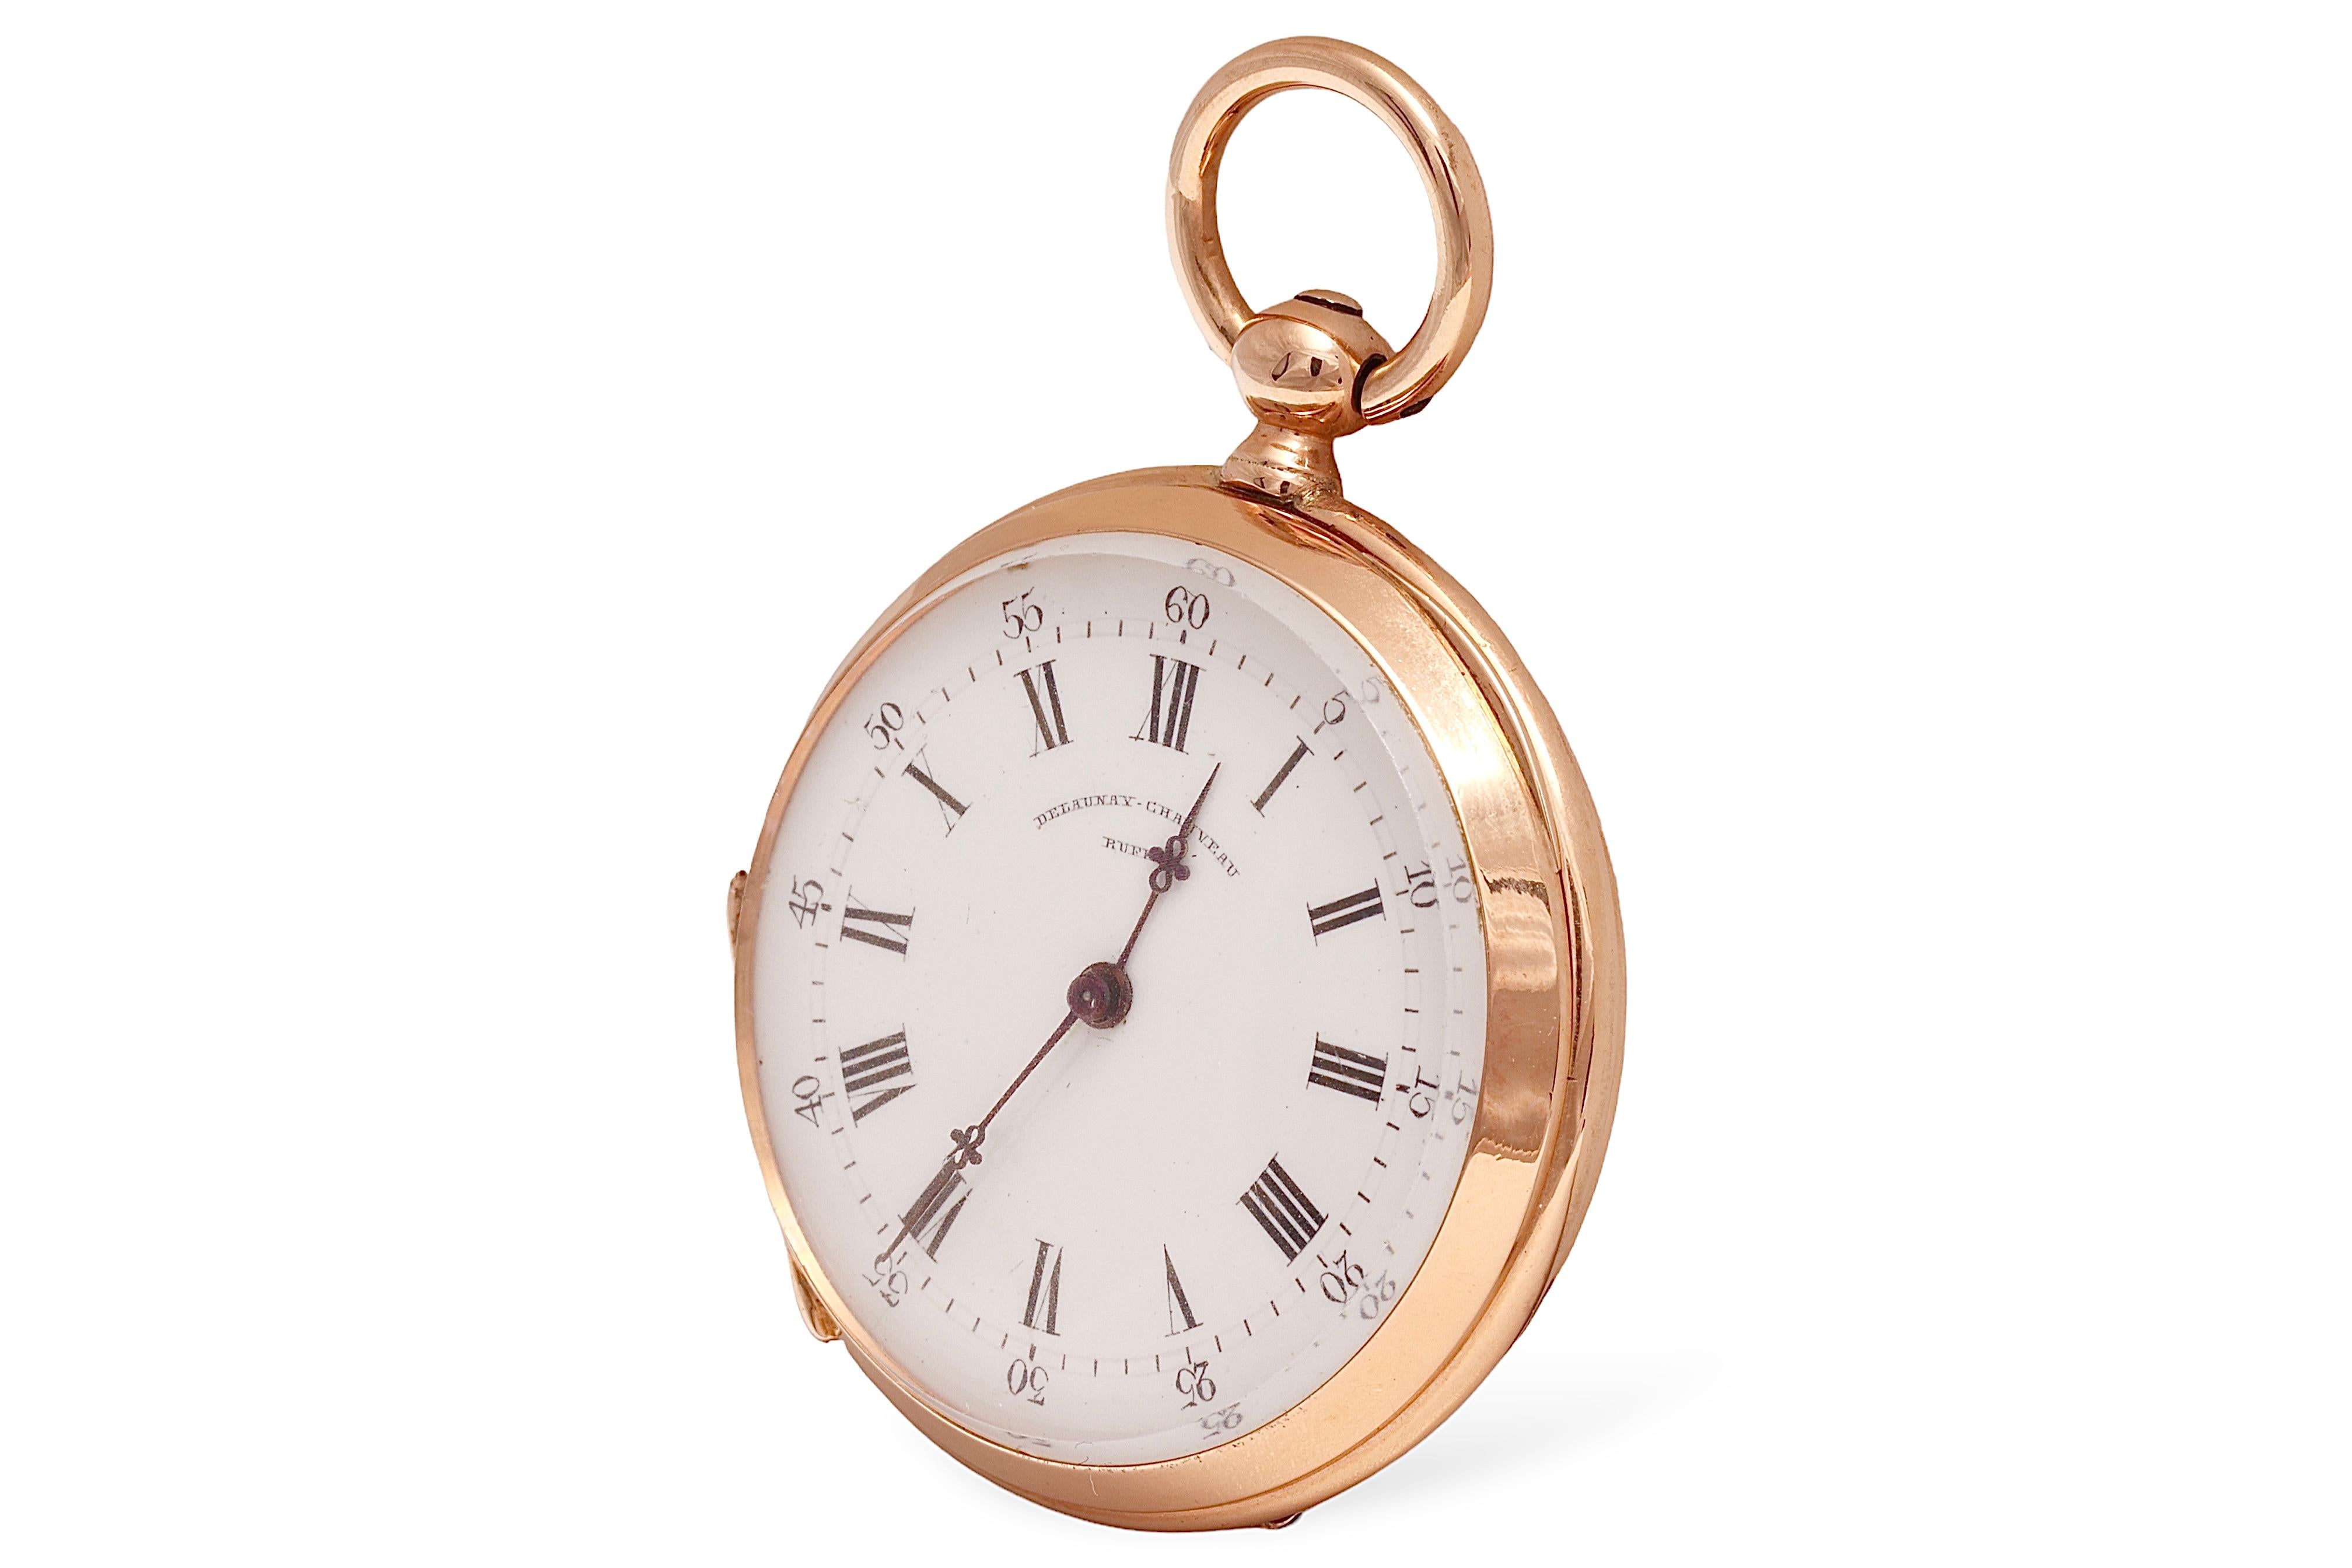 14 Kt Solid Pink Gold Delaunay Chauveau Ruffec pocket watch

Case: 14 Kt Solid Pink Gold, Diameter 33.5 mm thickness 10 mm

Dial: White Enamel dial with black romaine numerals, 

Total weight: 27.7 gram / 0.980 oz / 17.9 dwt